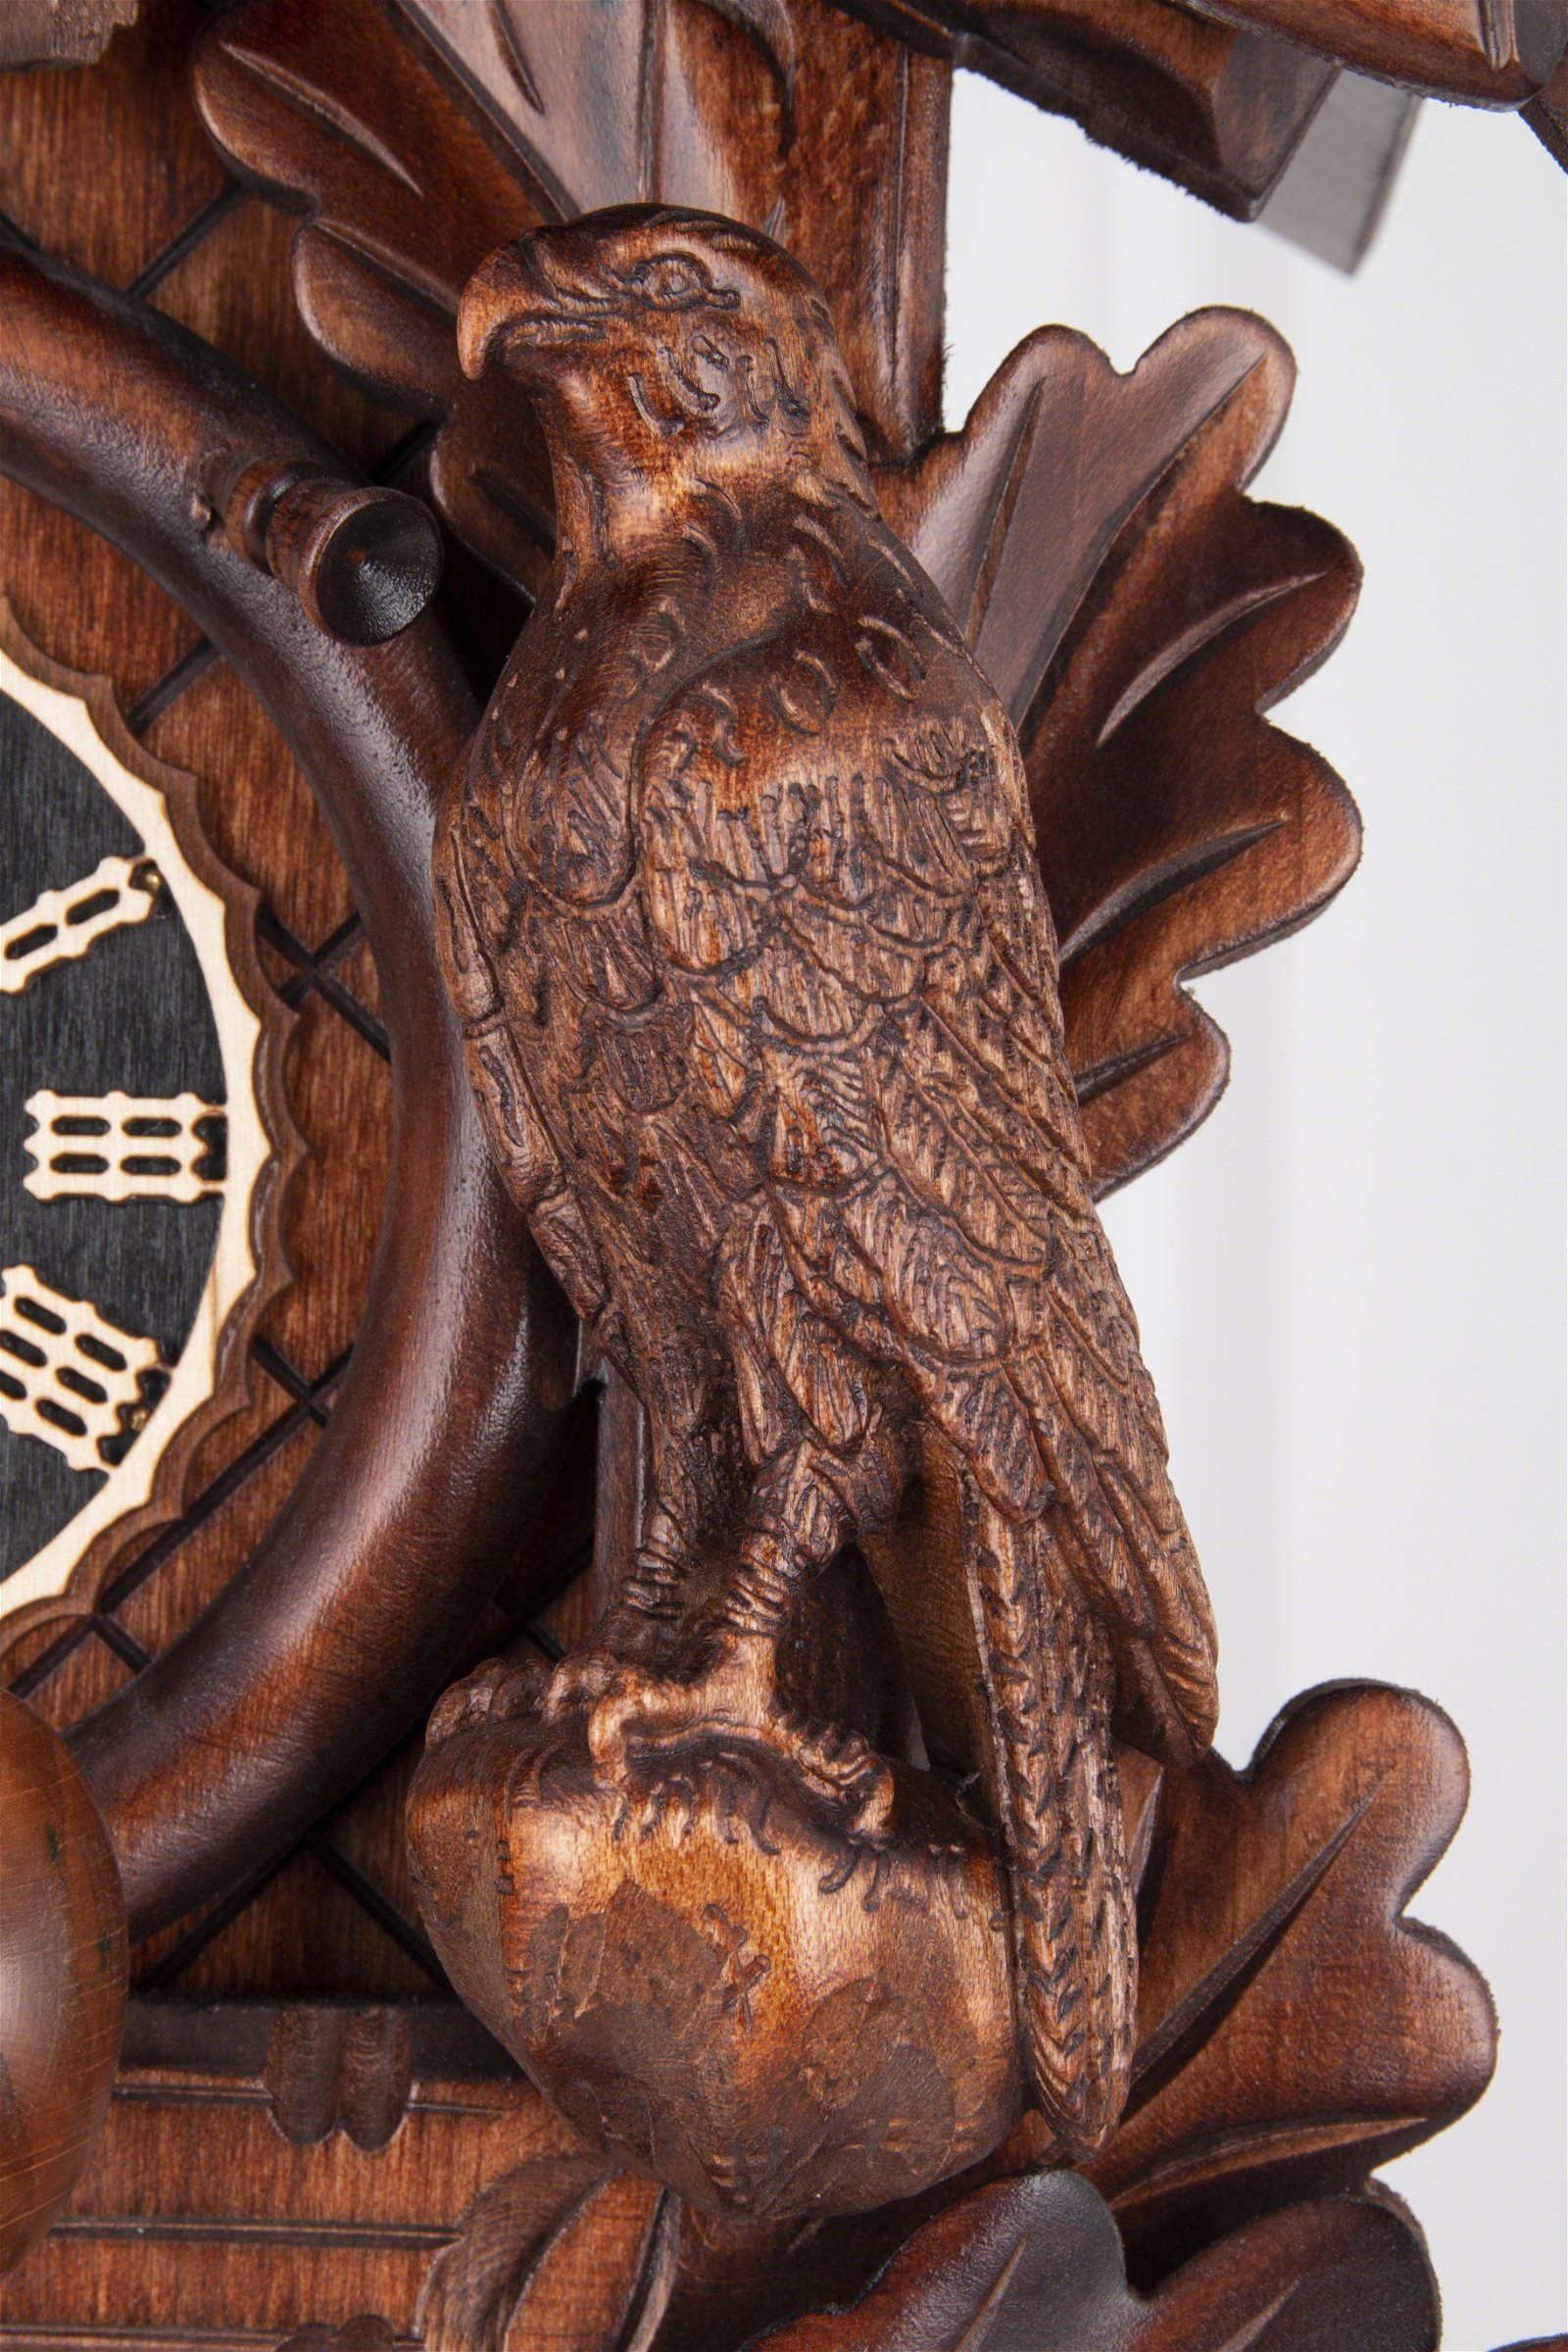 Cuckoo Clock Carved Style 1 Day Movement 40cm by Hönes